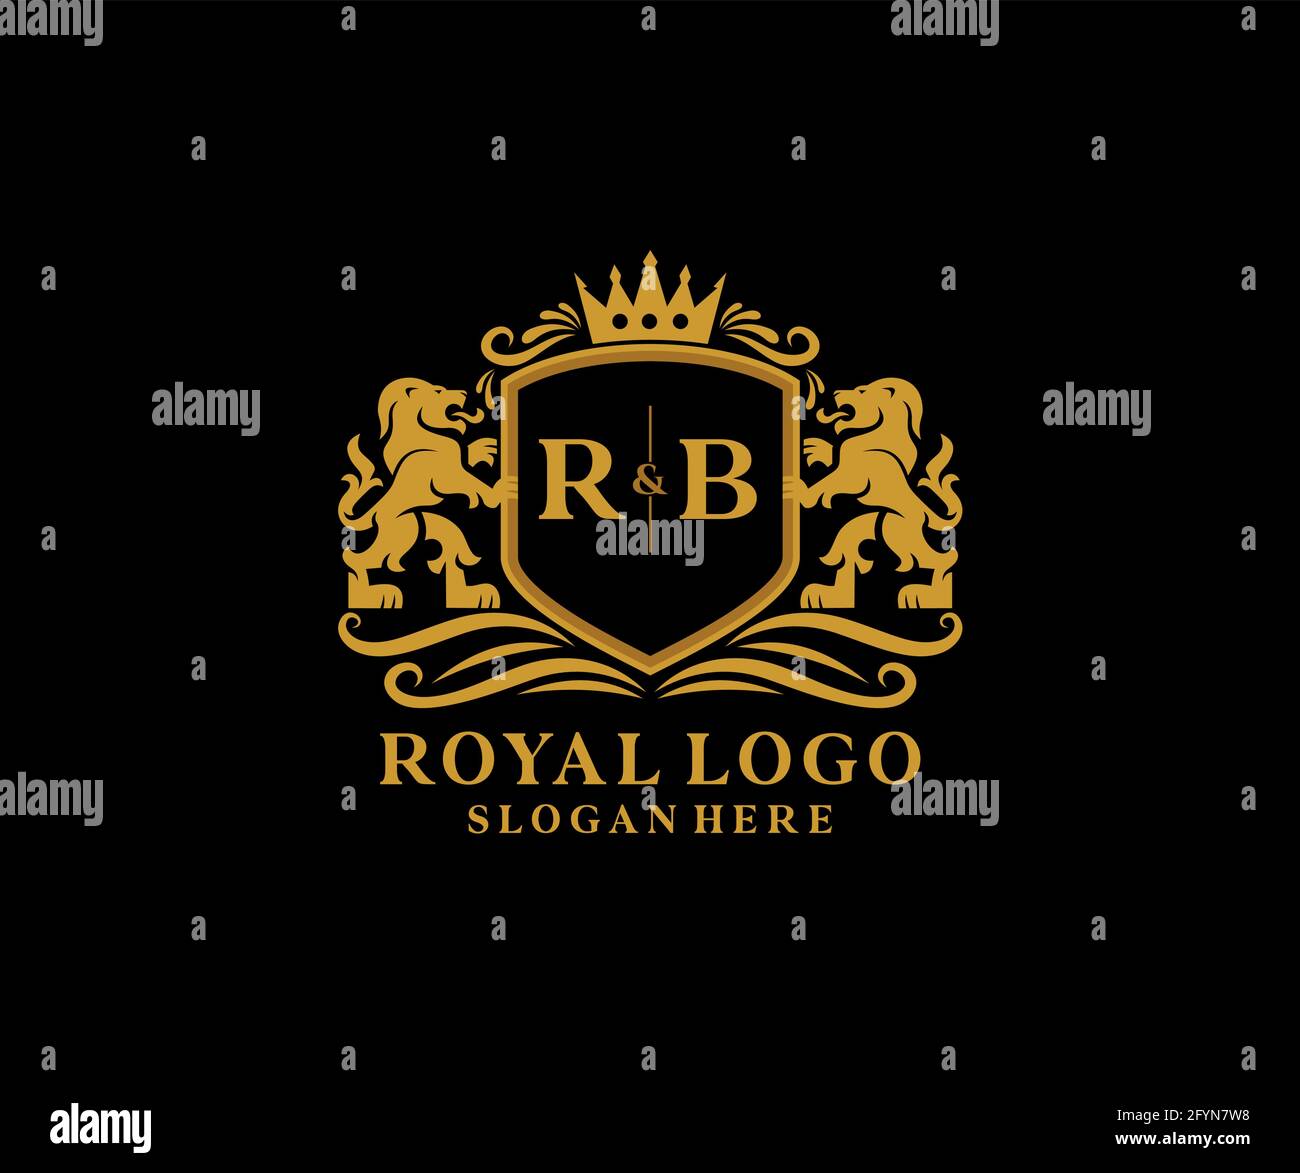 Entry #878 by RBM777 for ICONIC LOGO for LUXURY fashion brand